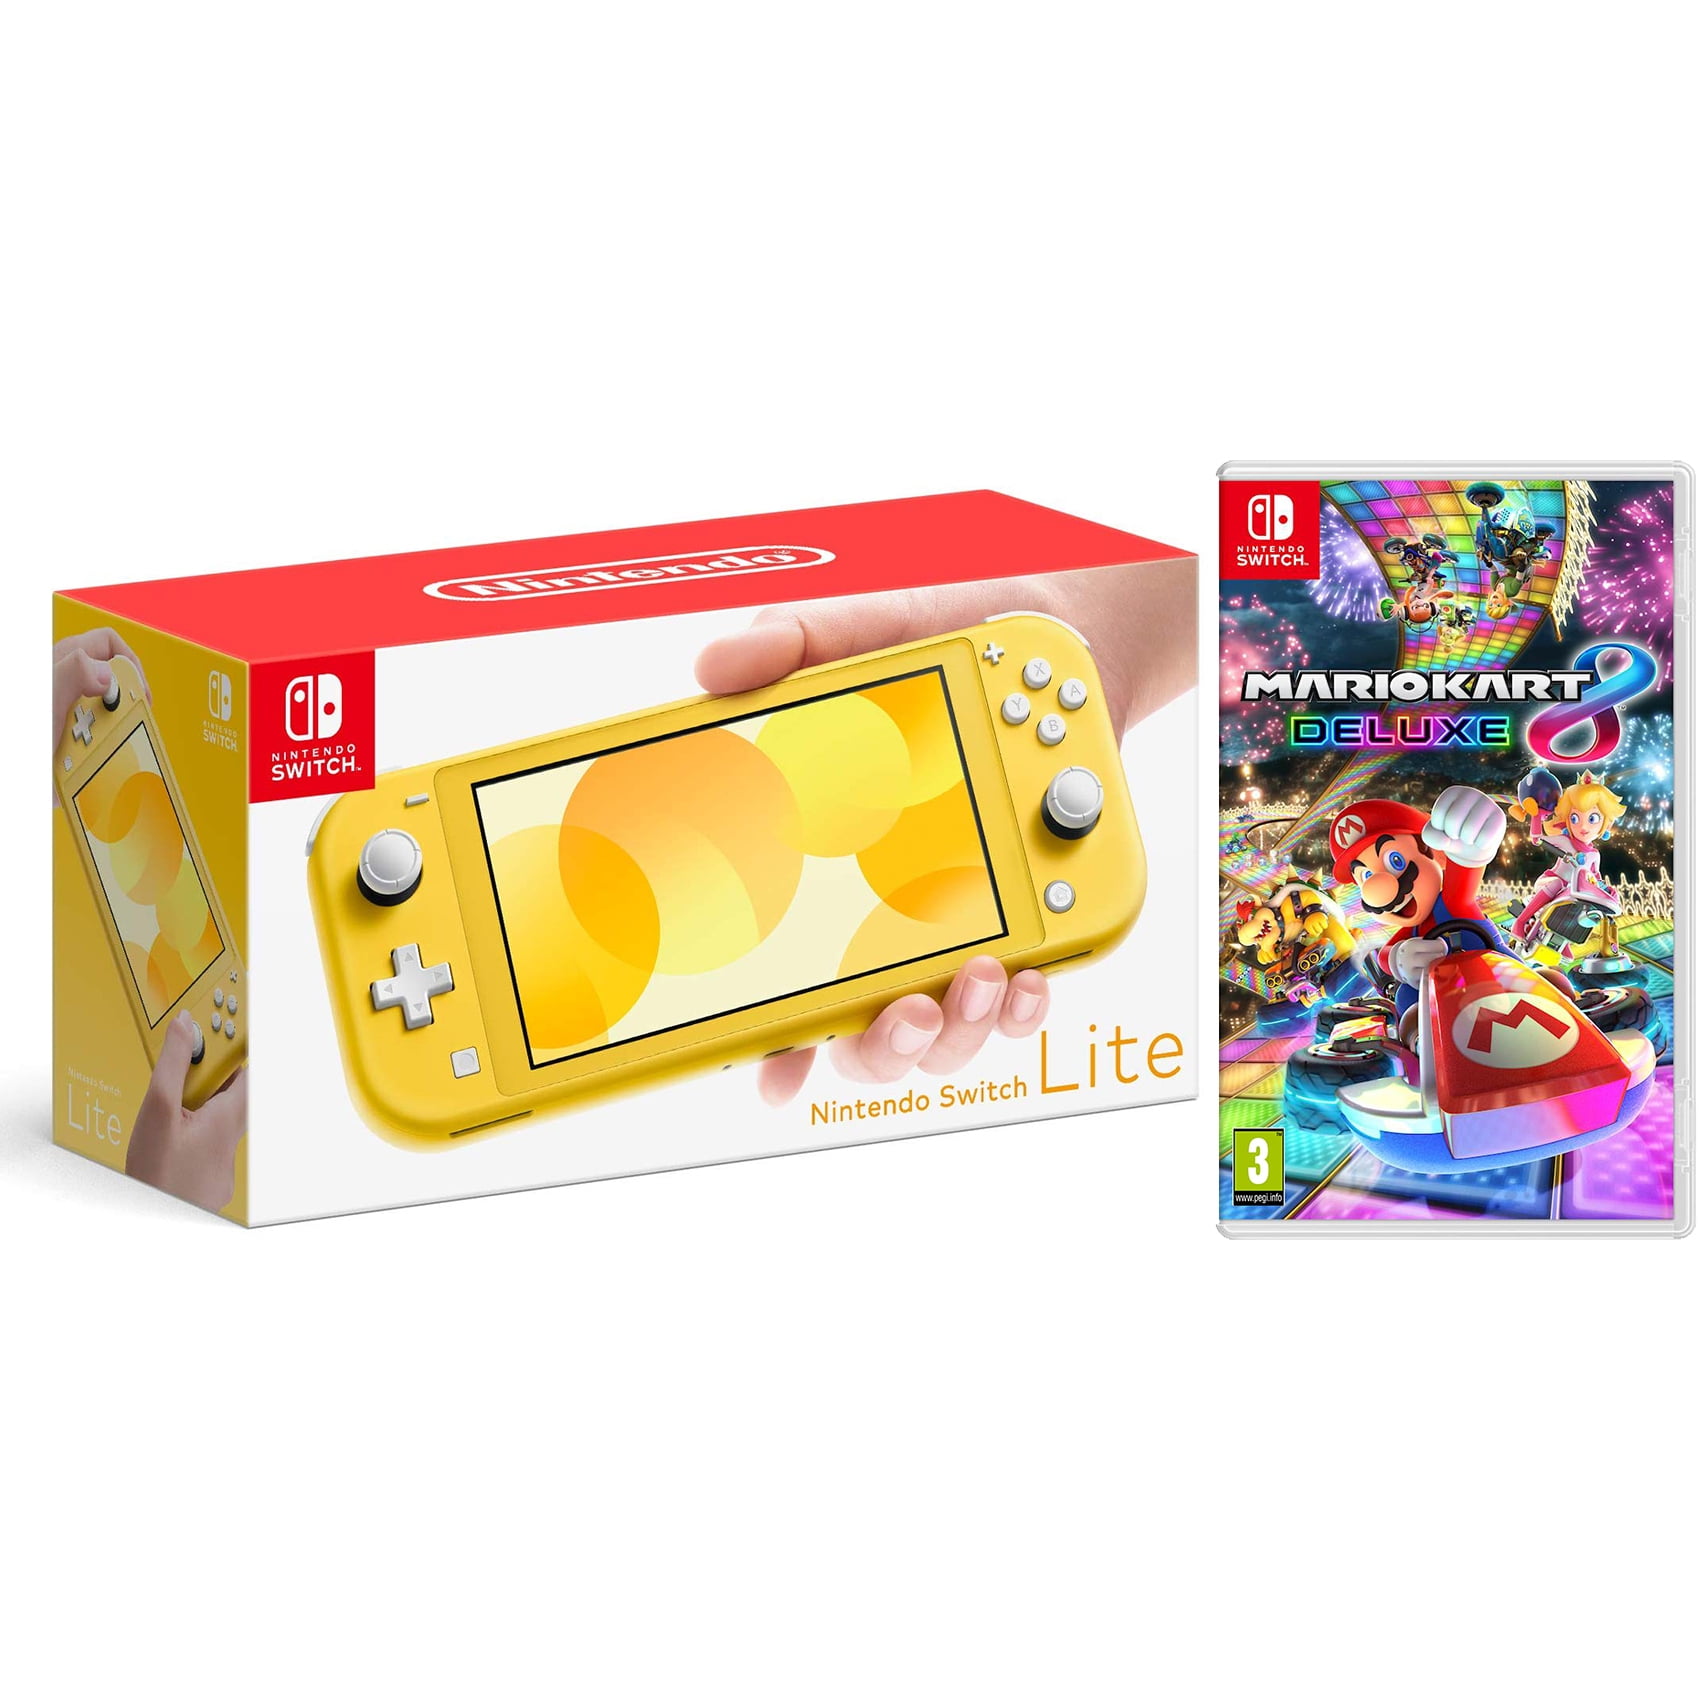 Nintendo Switch Lite 32GB Turquoise and The Legend of Zelda 